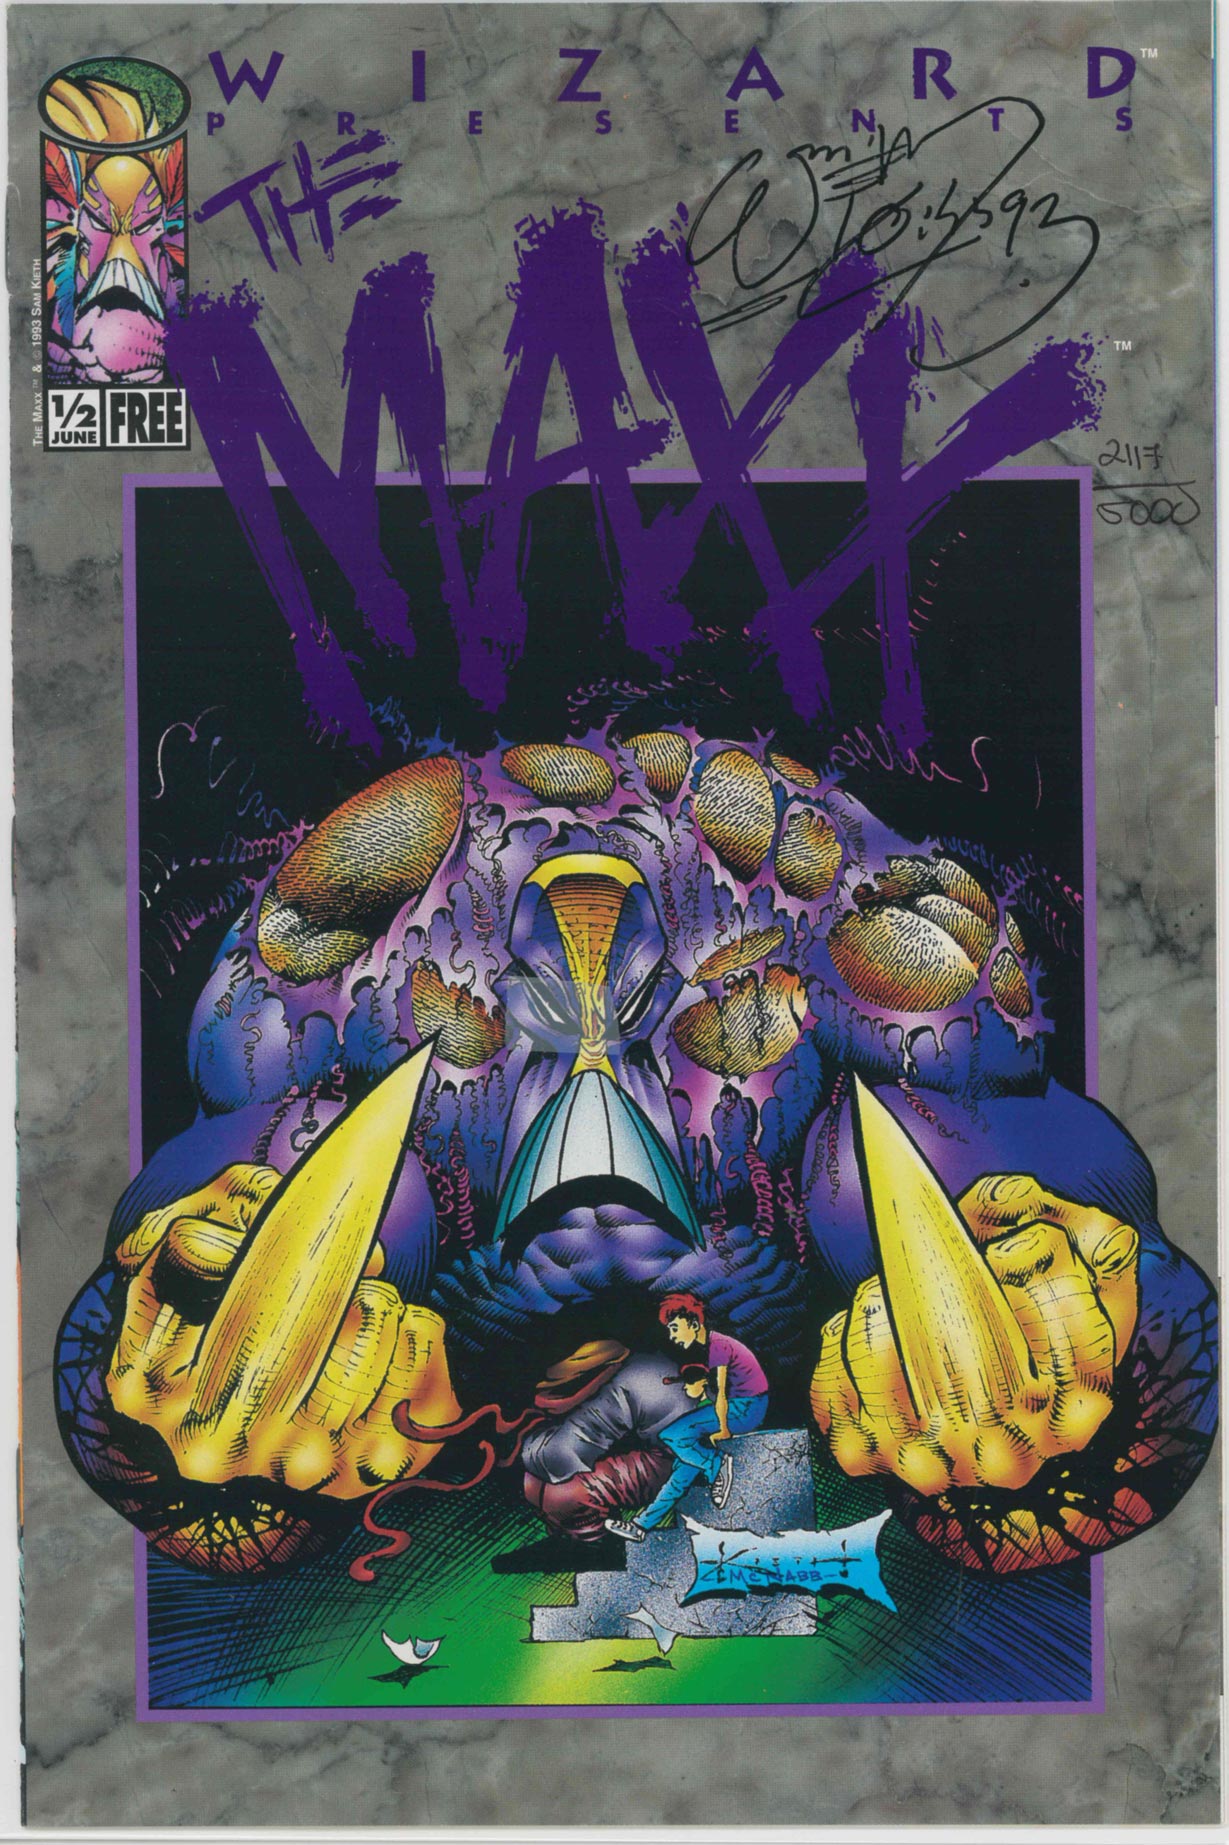 MAXX (1993) WIZARD 1/2 - DYNAMIC FORCES SIGNED EDITION